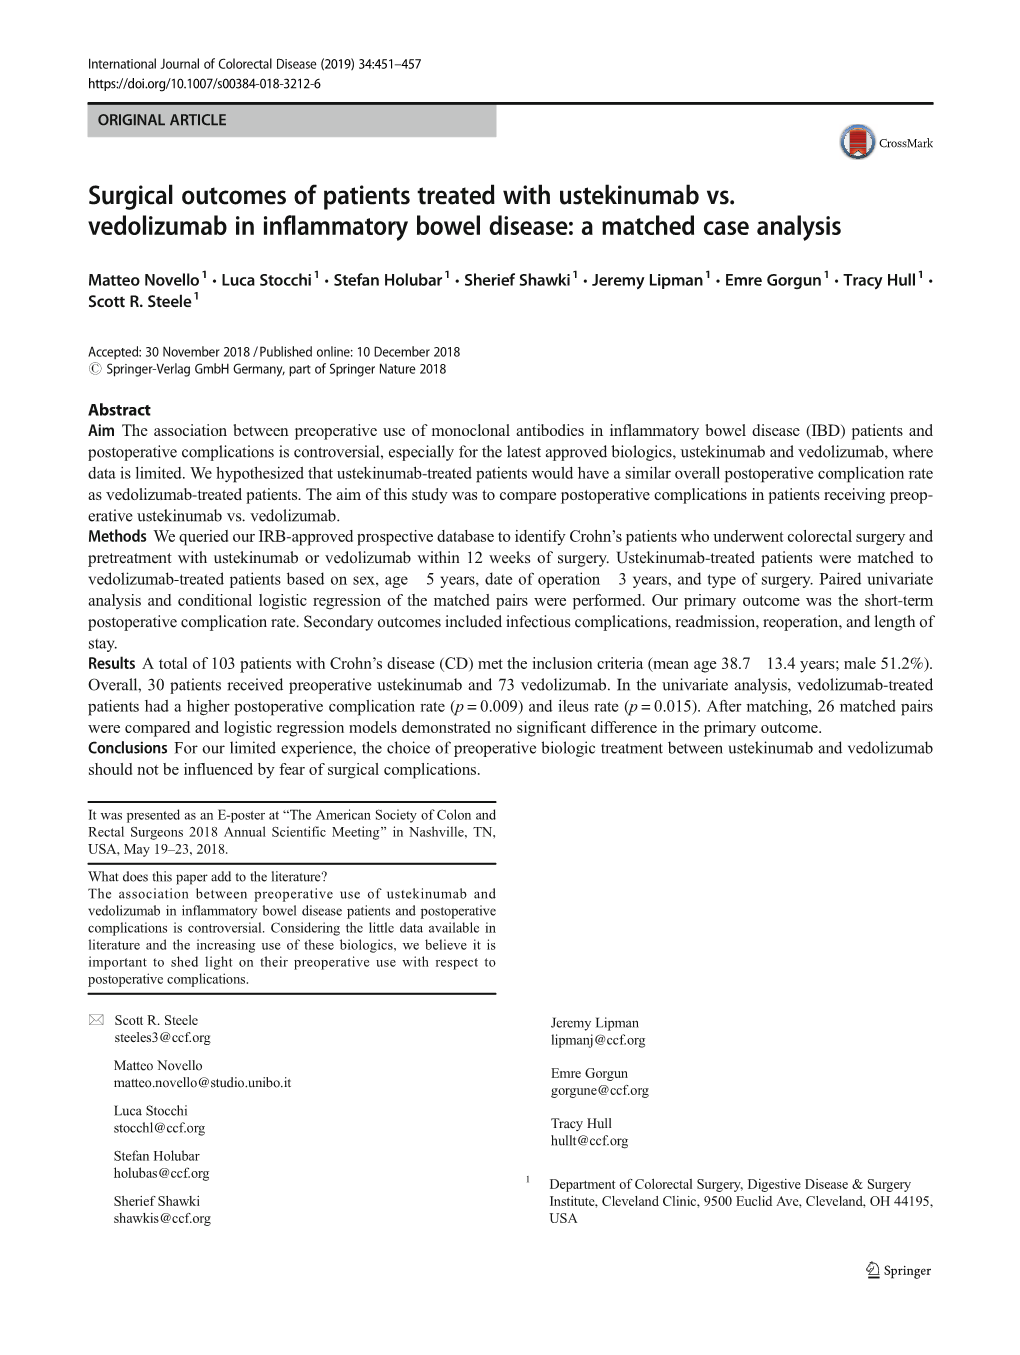 Surgical Outcomes of Patients Treated with Ustekinumab Vs. Vedolizumab in Inflammatory Bowel Disease: a Matched Case Analysis